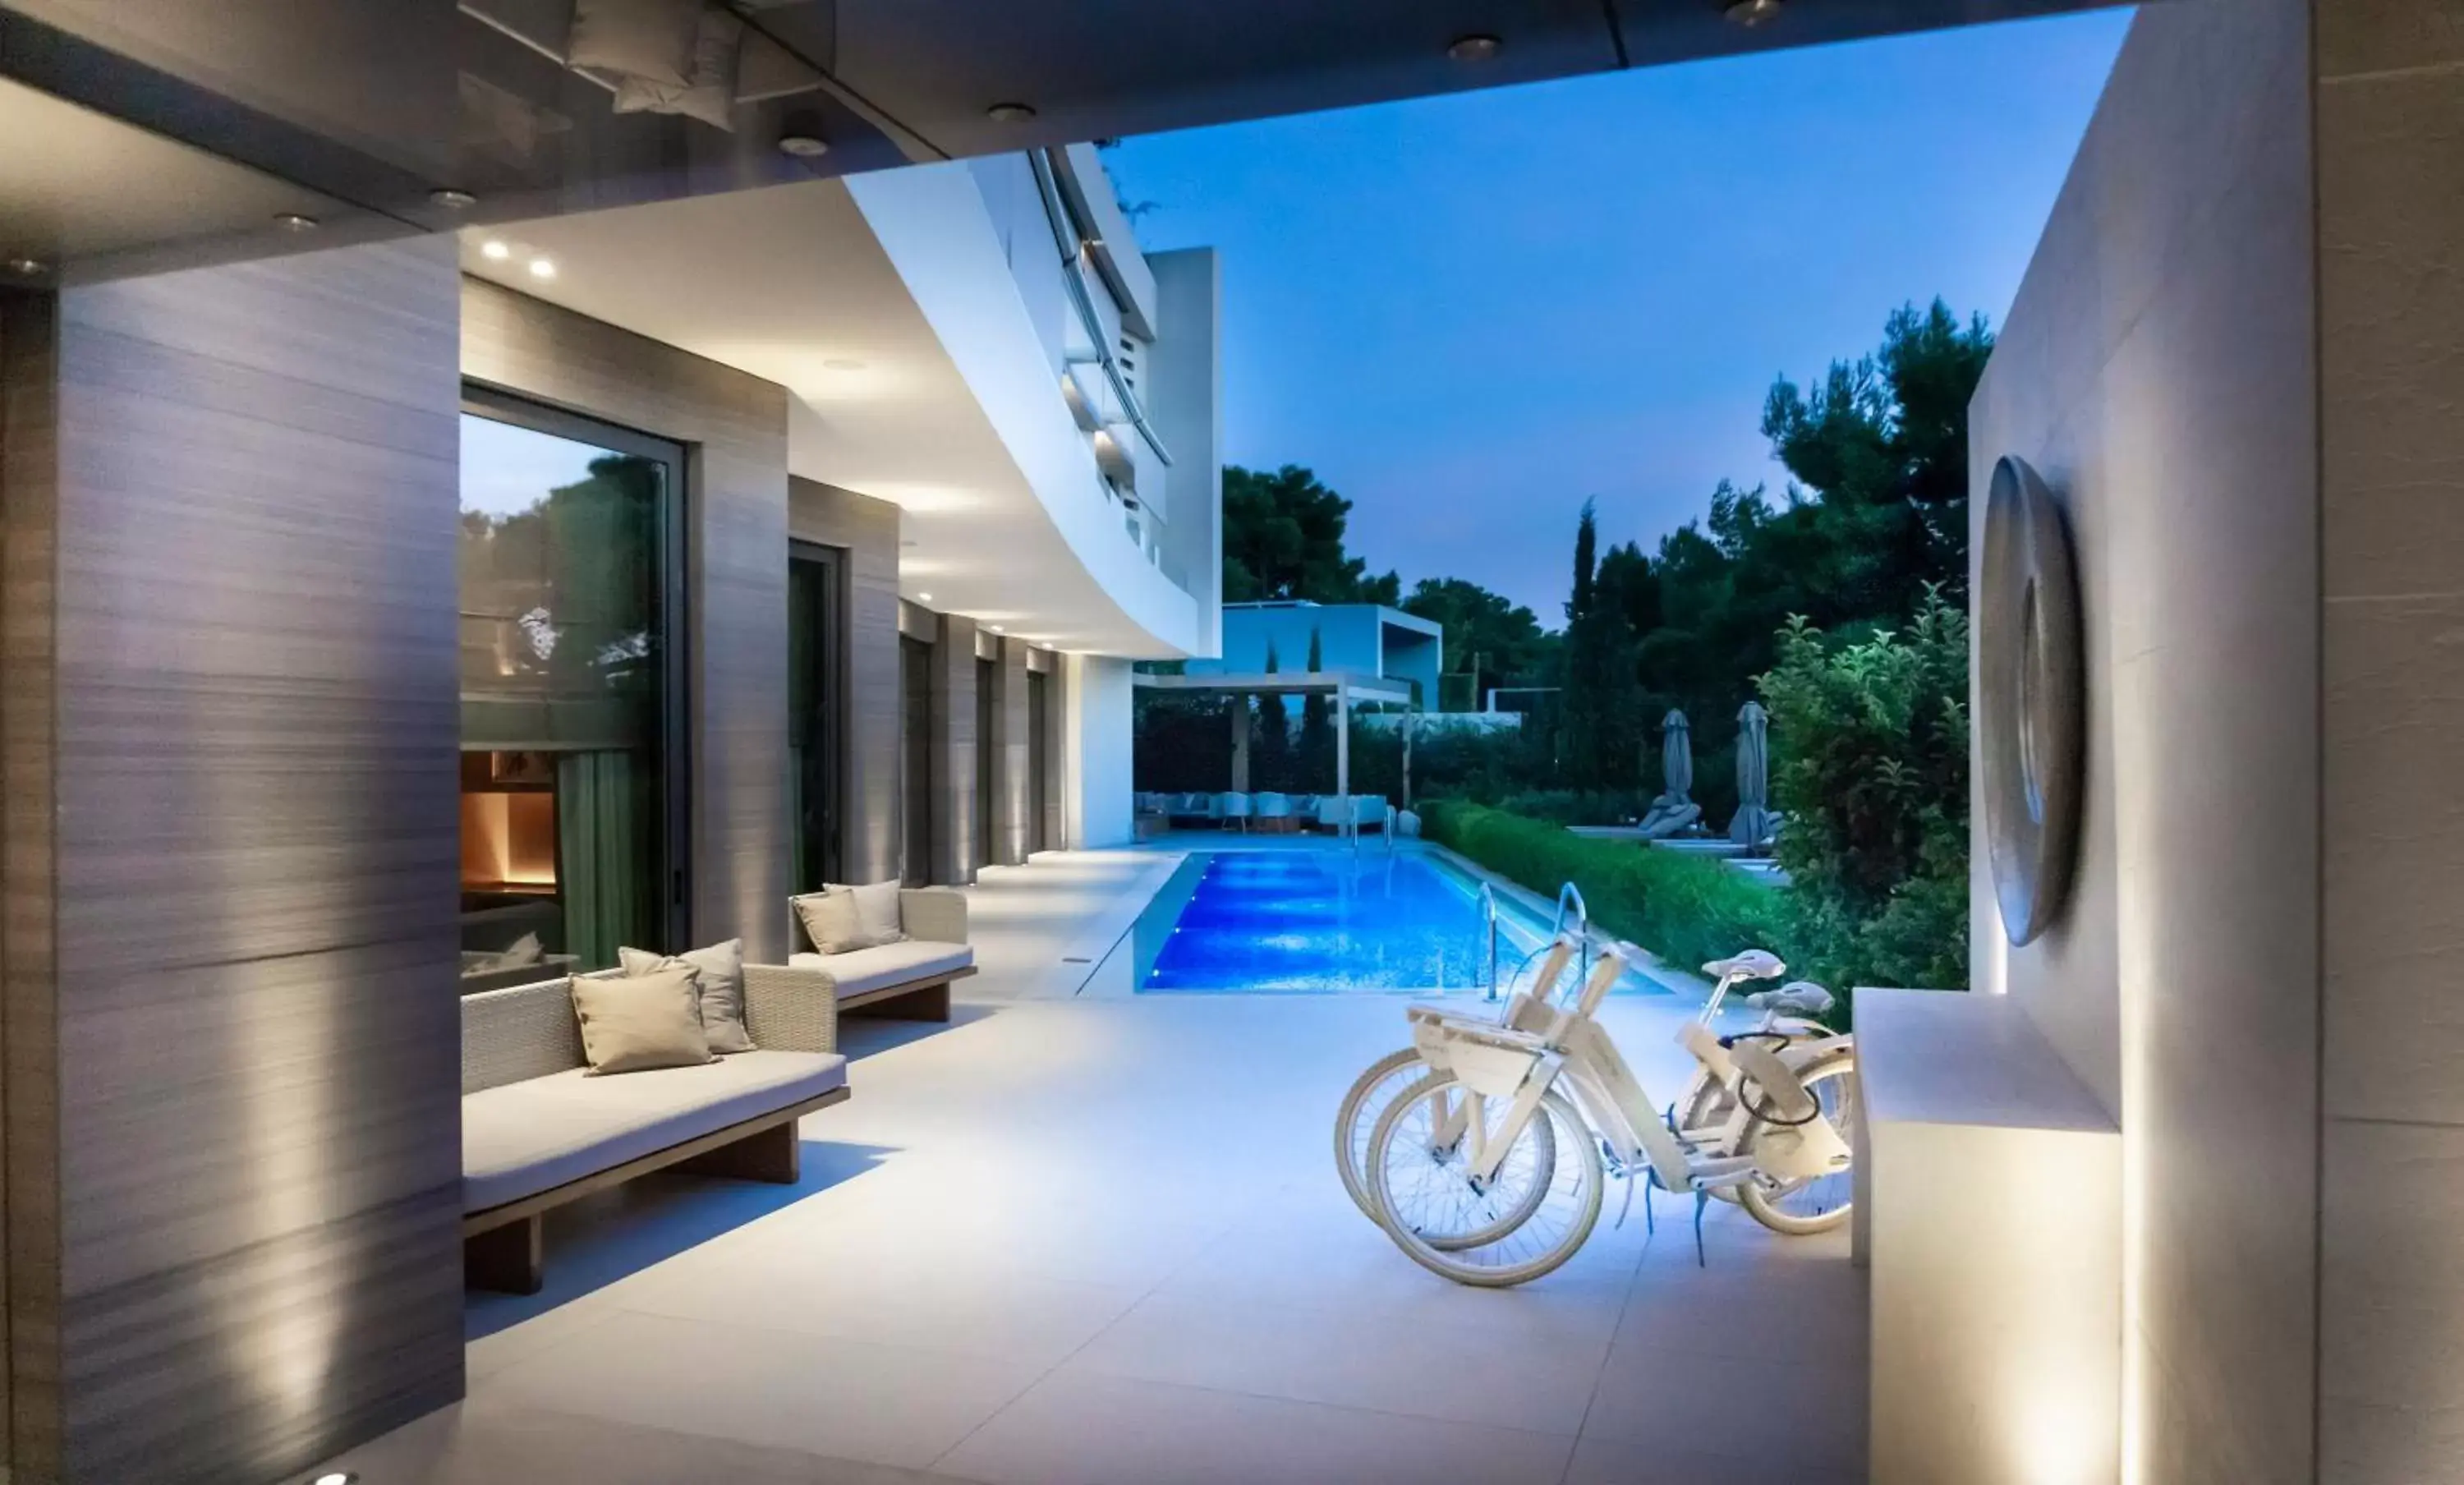 Property building, Swimming Pool in Somewhere Vouliagmeni